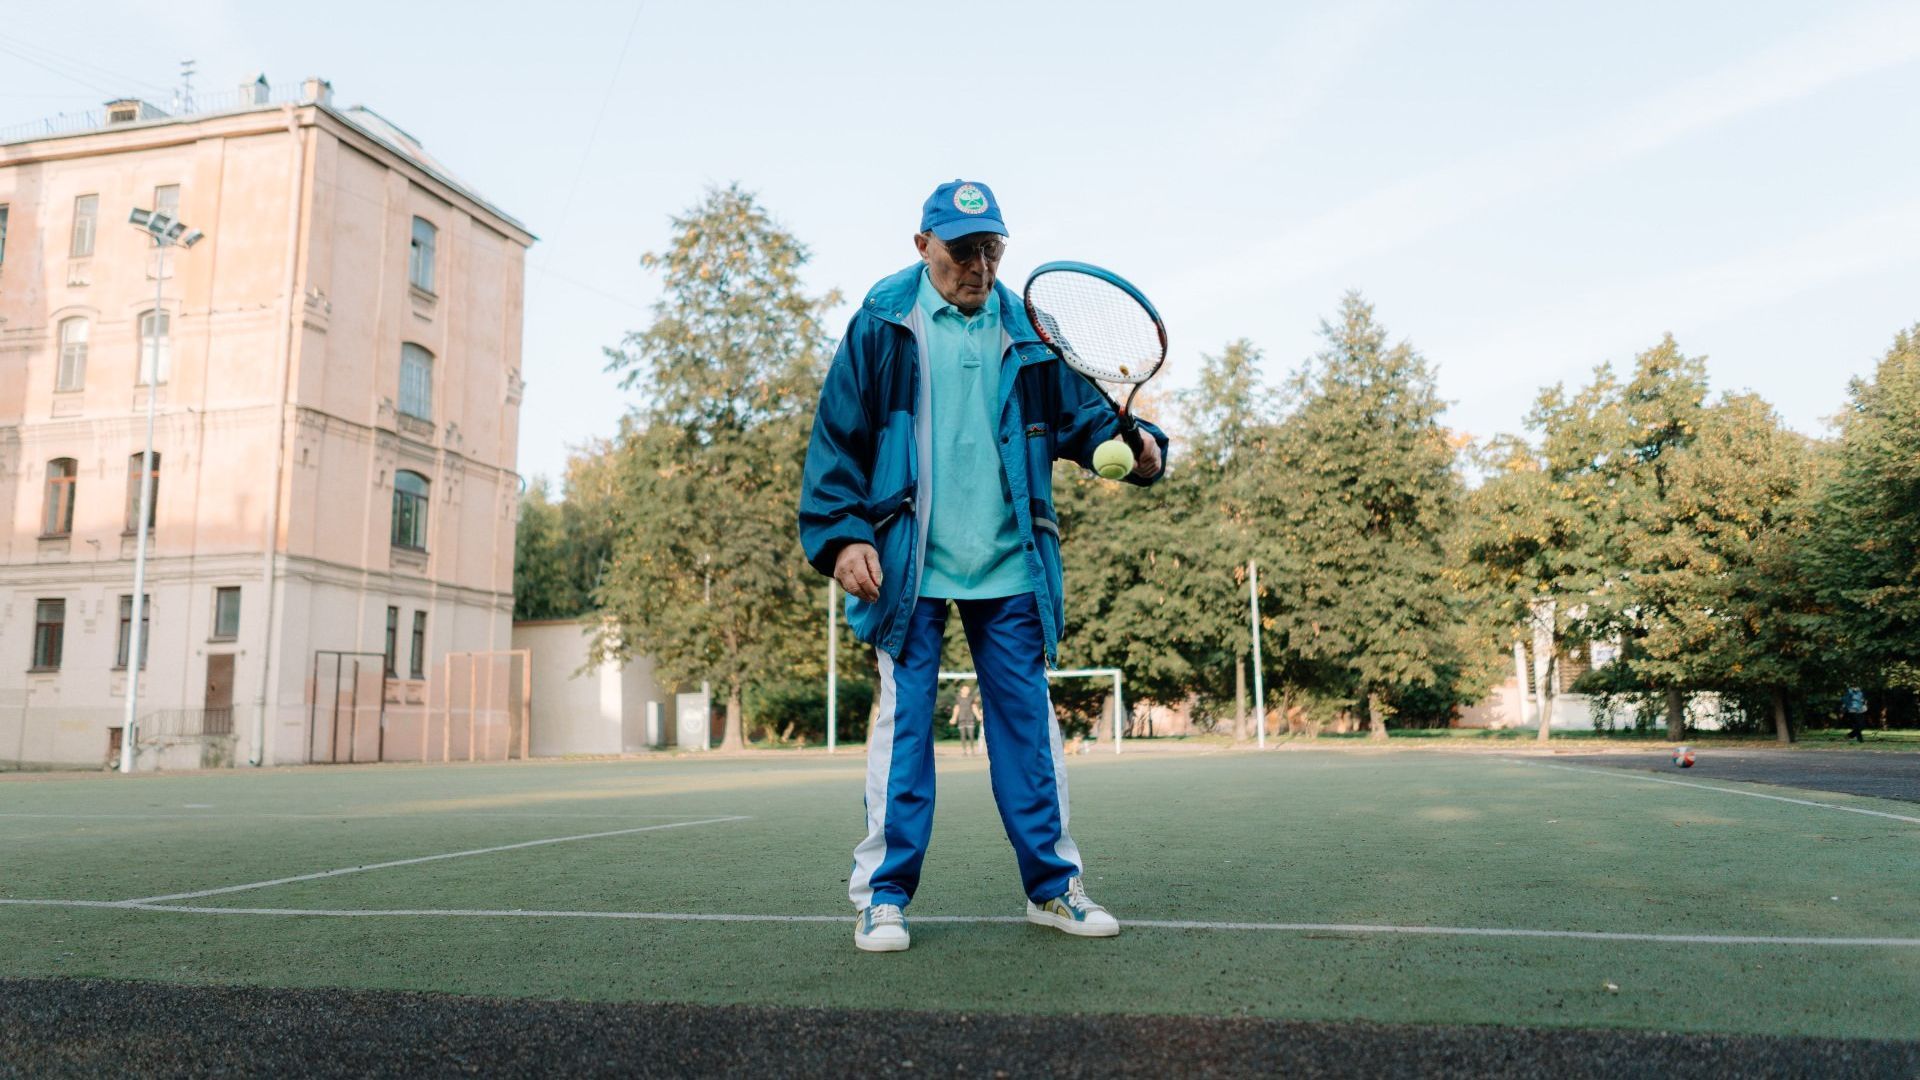 Old man holding Tennis Racket playing ball in the Park